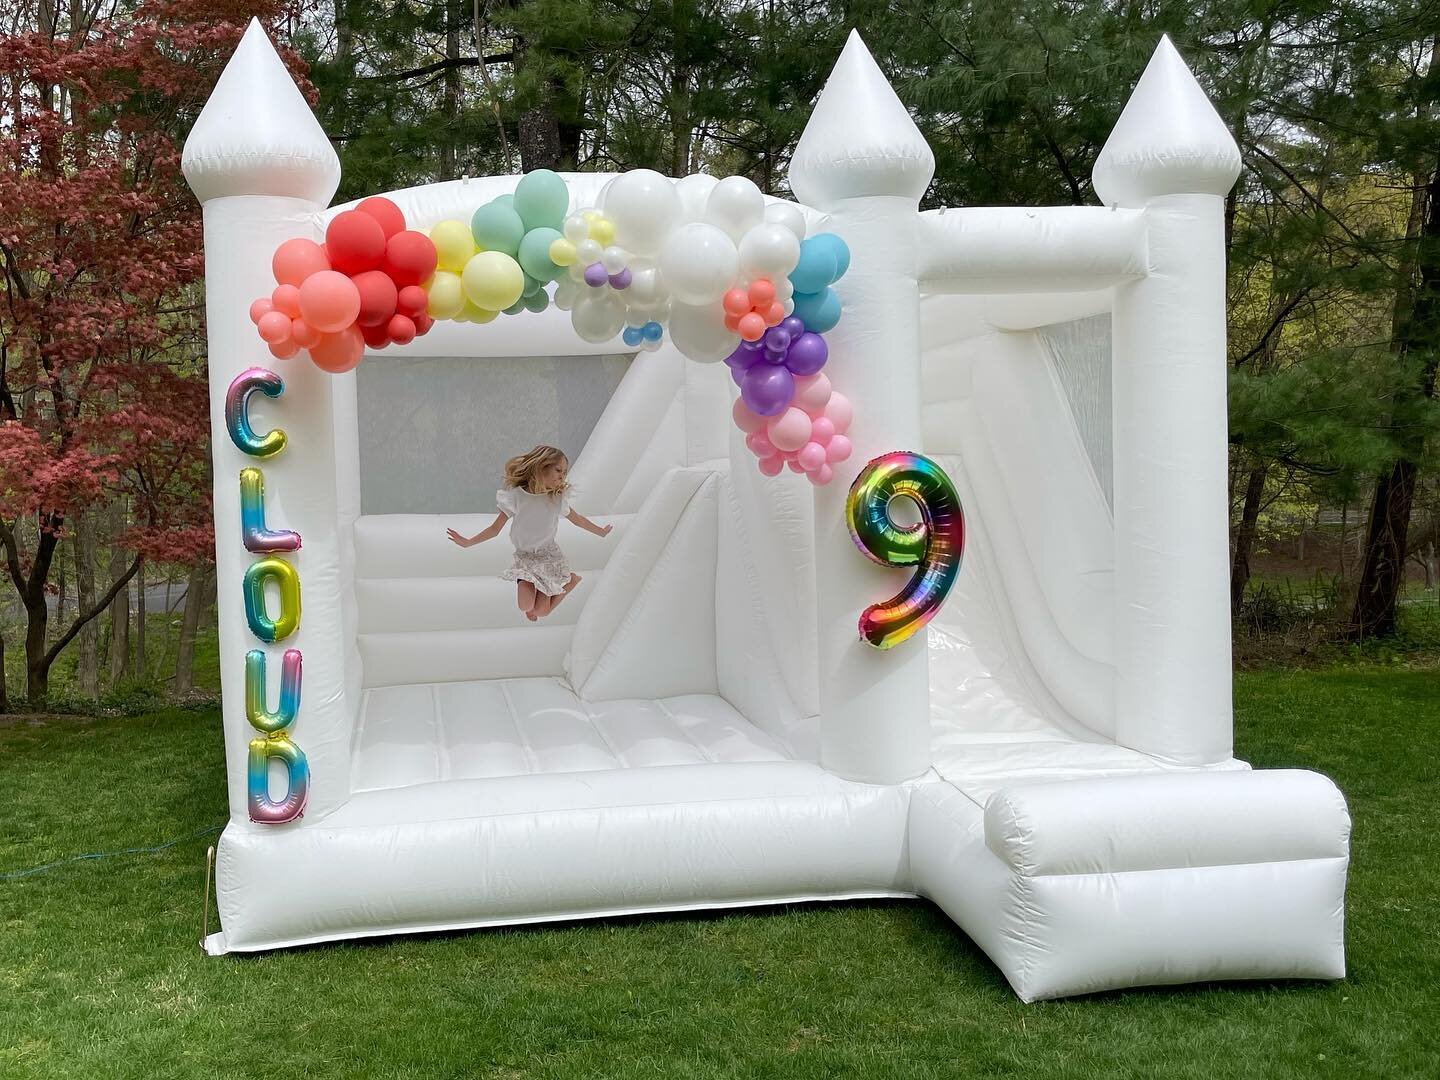 I was on ☁️ Cloud 9 to help bring sweet Sydney&rsquo;s 9th birthday vision come together!Thanks @michmoonan @ridgefield_moms for including me in the fun &amp; planning! And while we wanted clouds we dodged that rain 🌧️!

#cloud9 #modernbouncehouse #